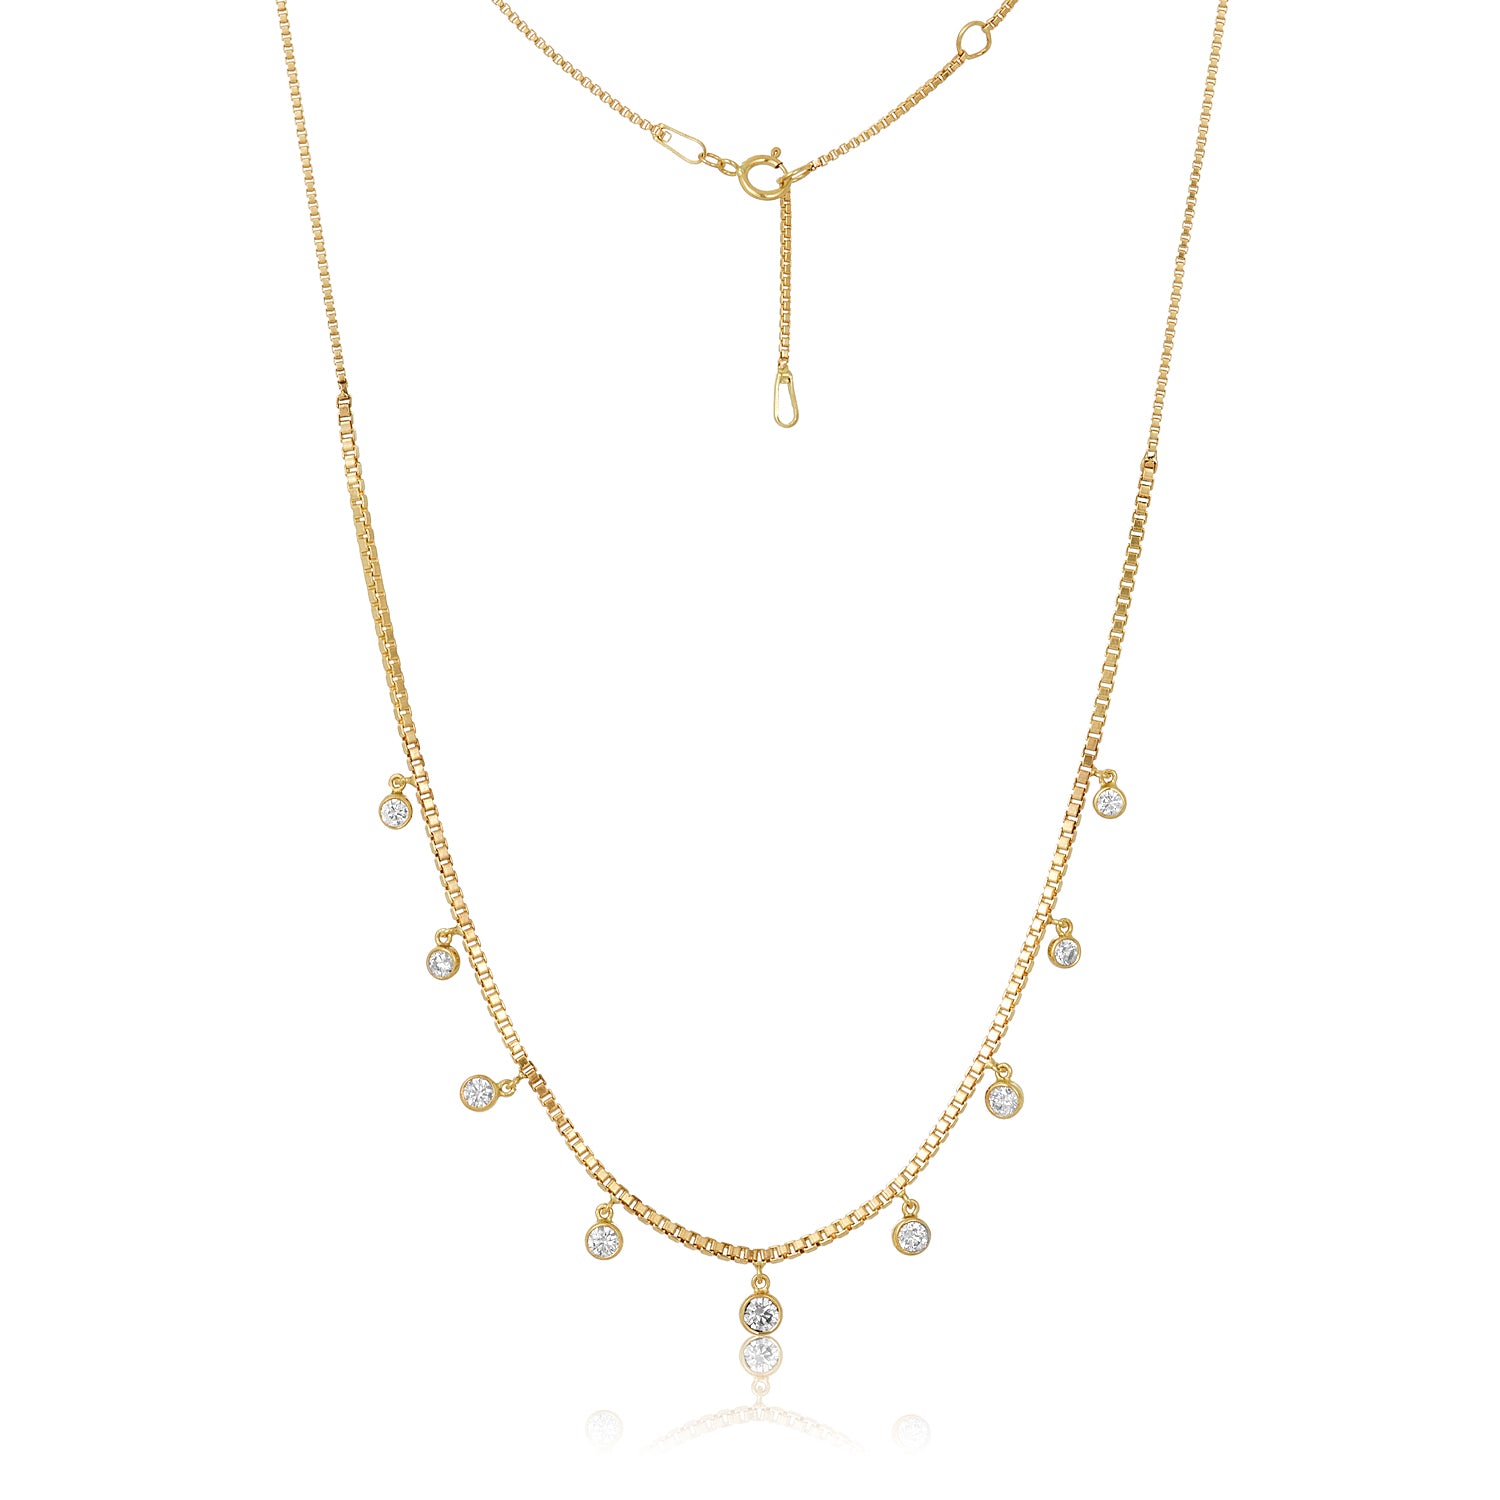 Dangly Diamonds Necklace in 14k